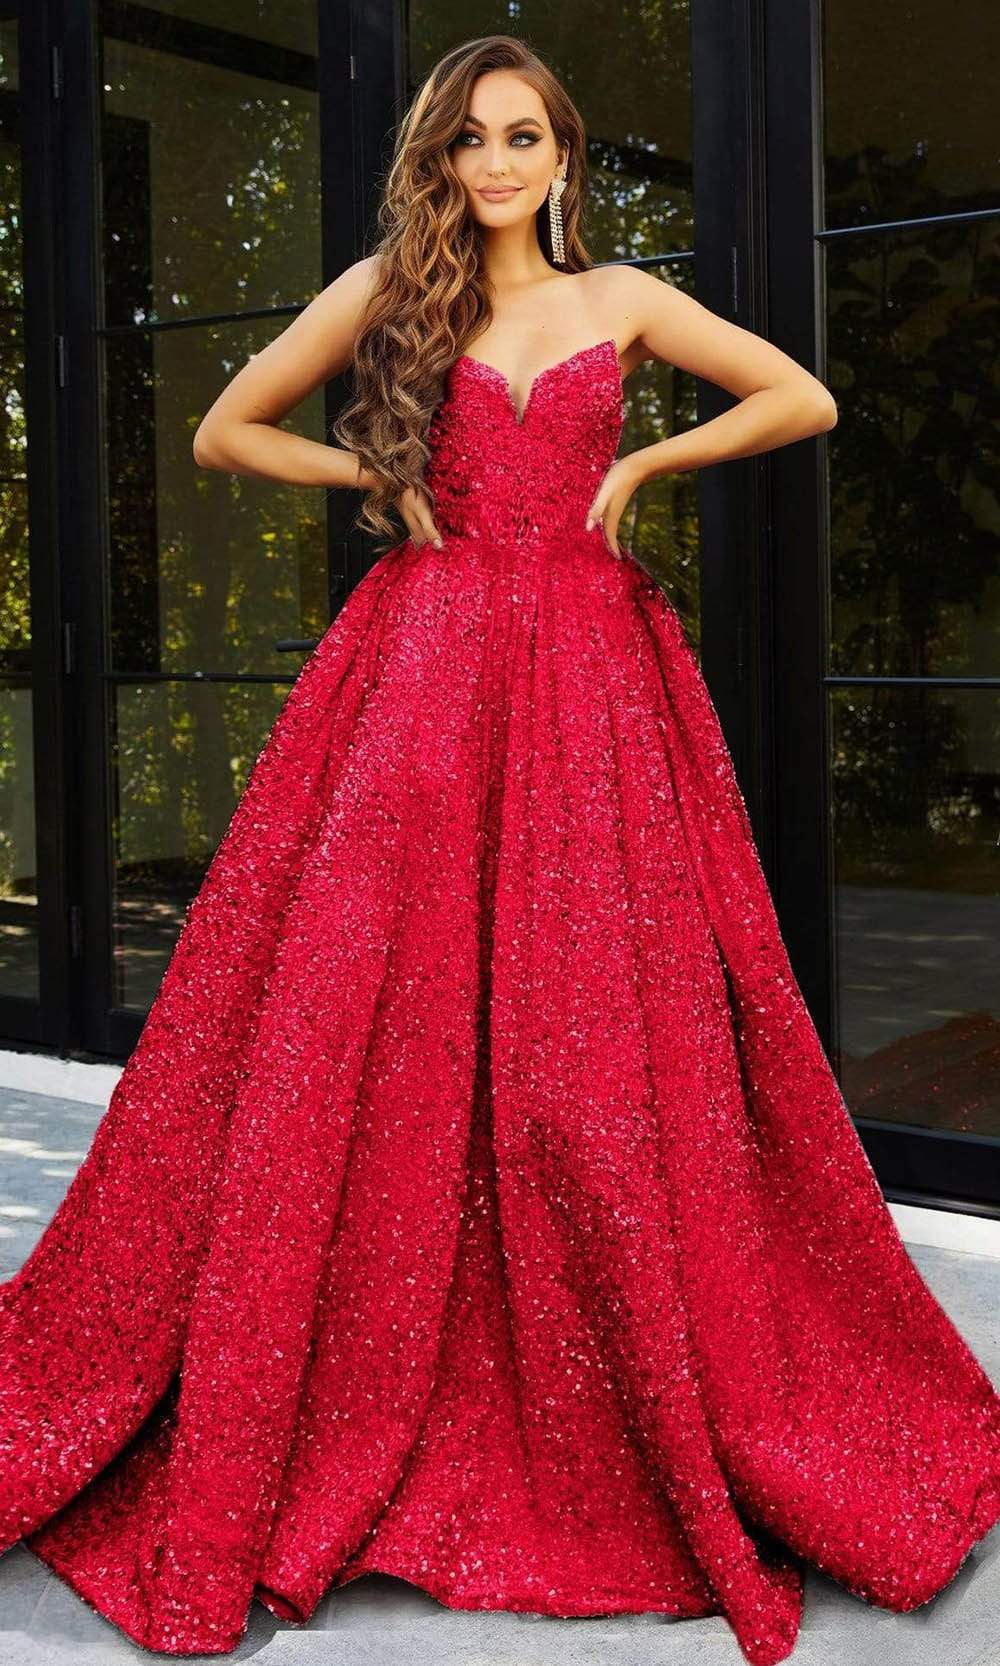 Portia and Scarlett - Ps21208B Strapless Sequin Ballgown Special Occasion Dress